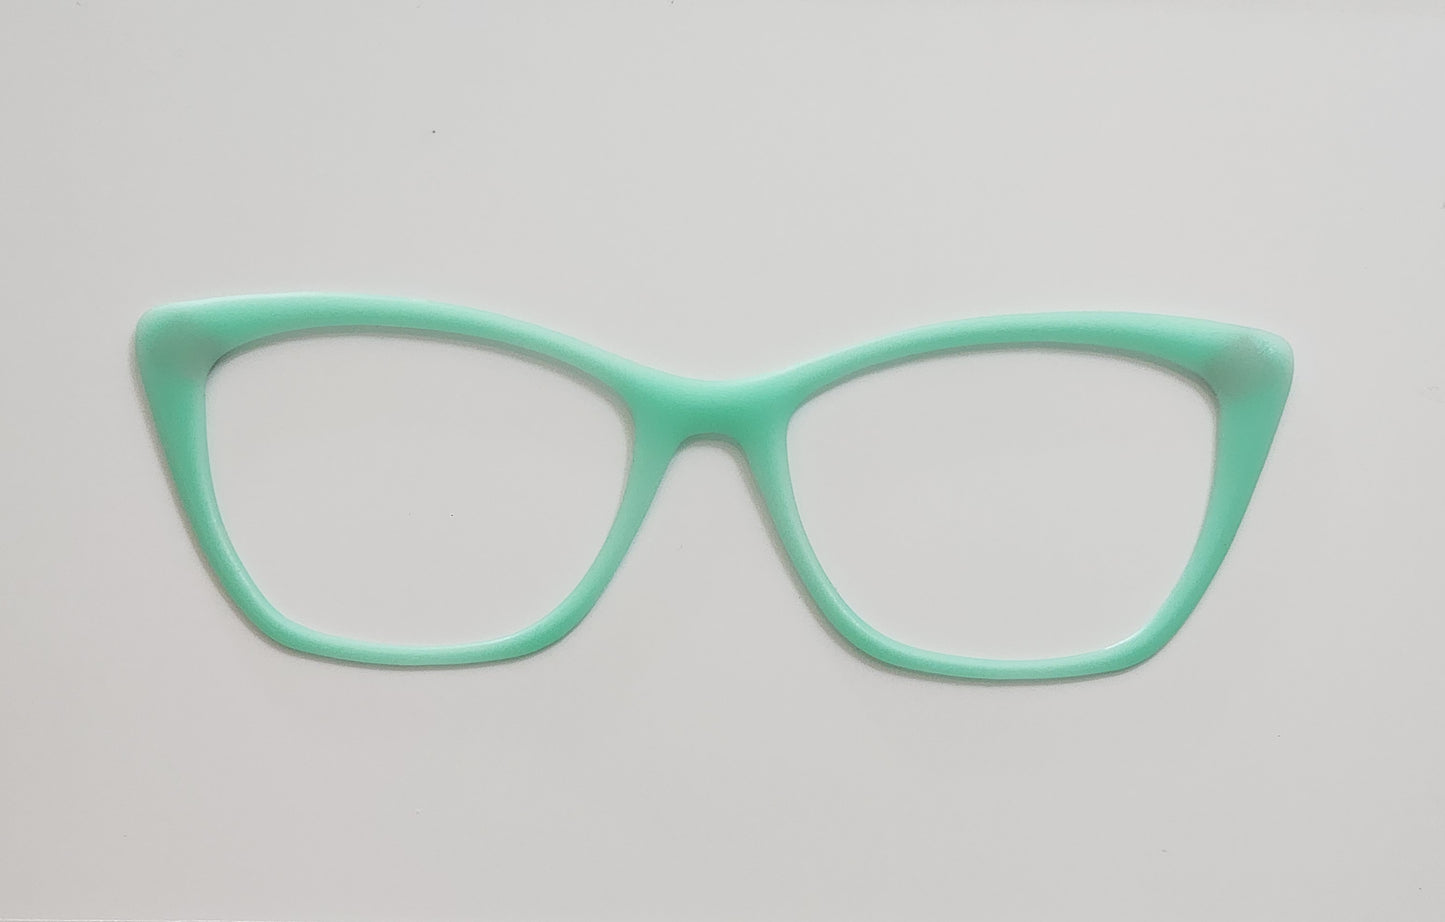 Willow - Creamy turquoise, matte finish, READY TO SHIP